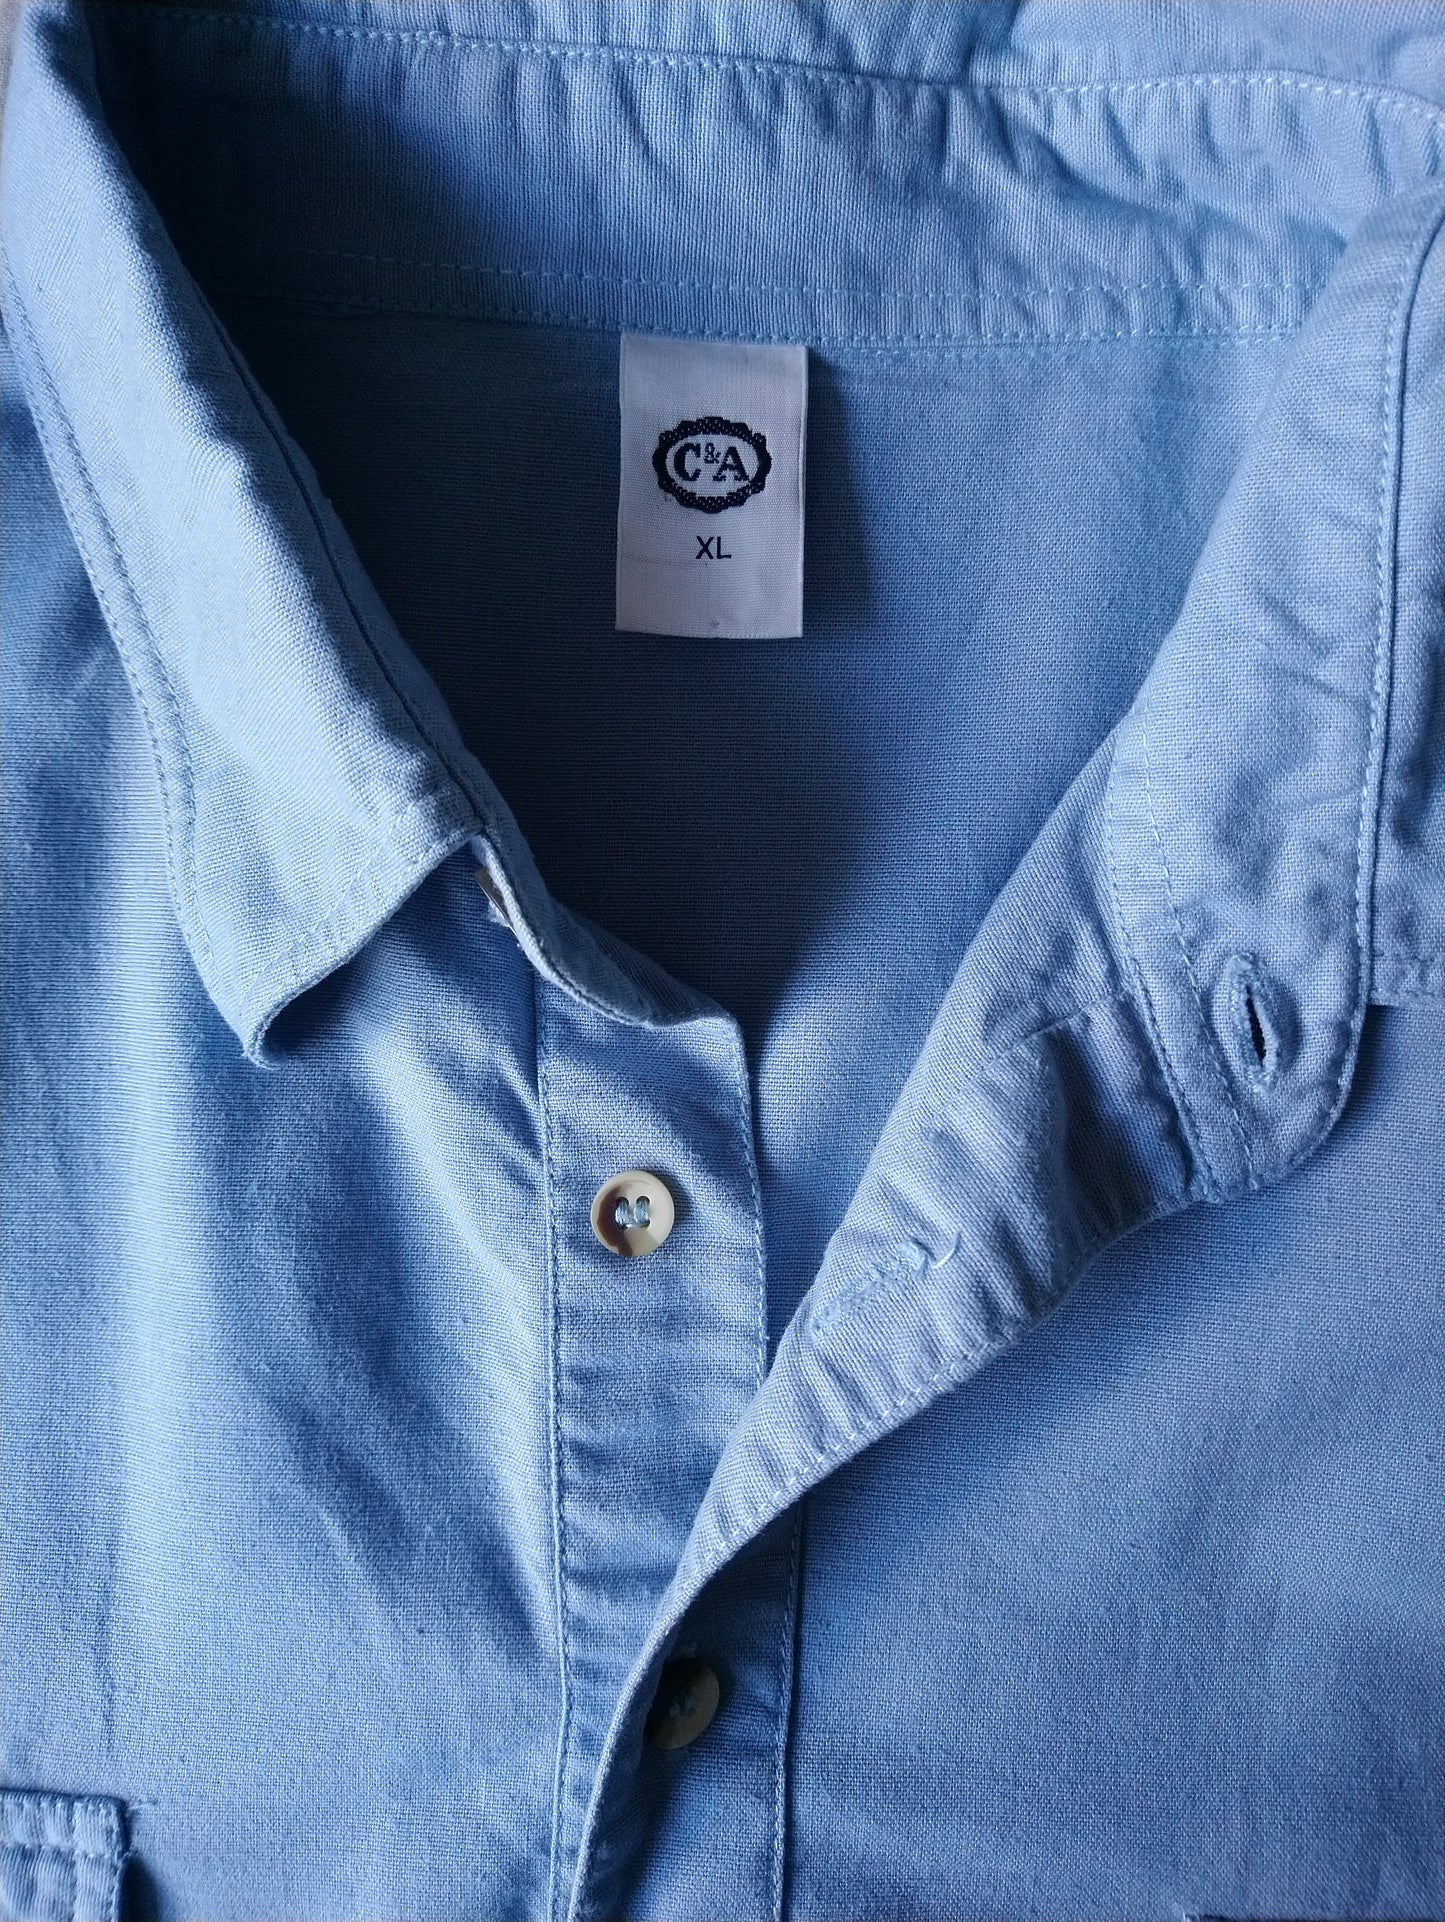 Vintage C&A Polo with elastic band. Light blue colored. Size XL / XXL - 2XL.